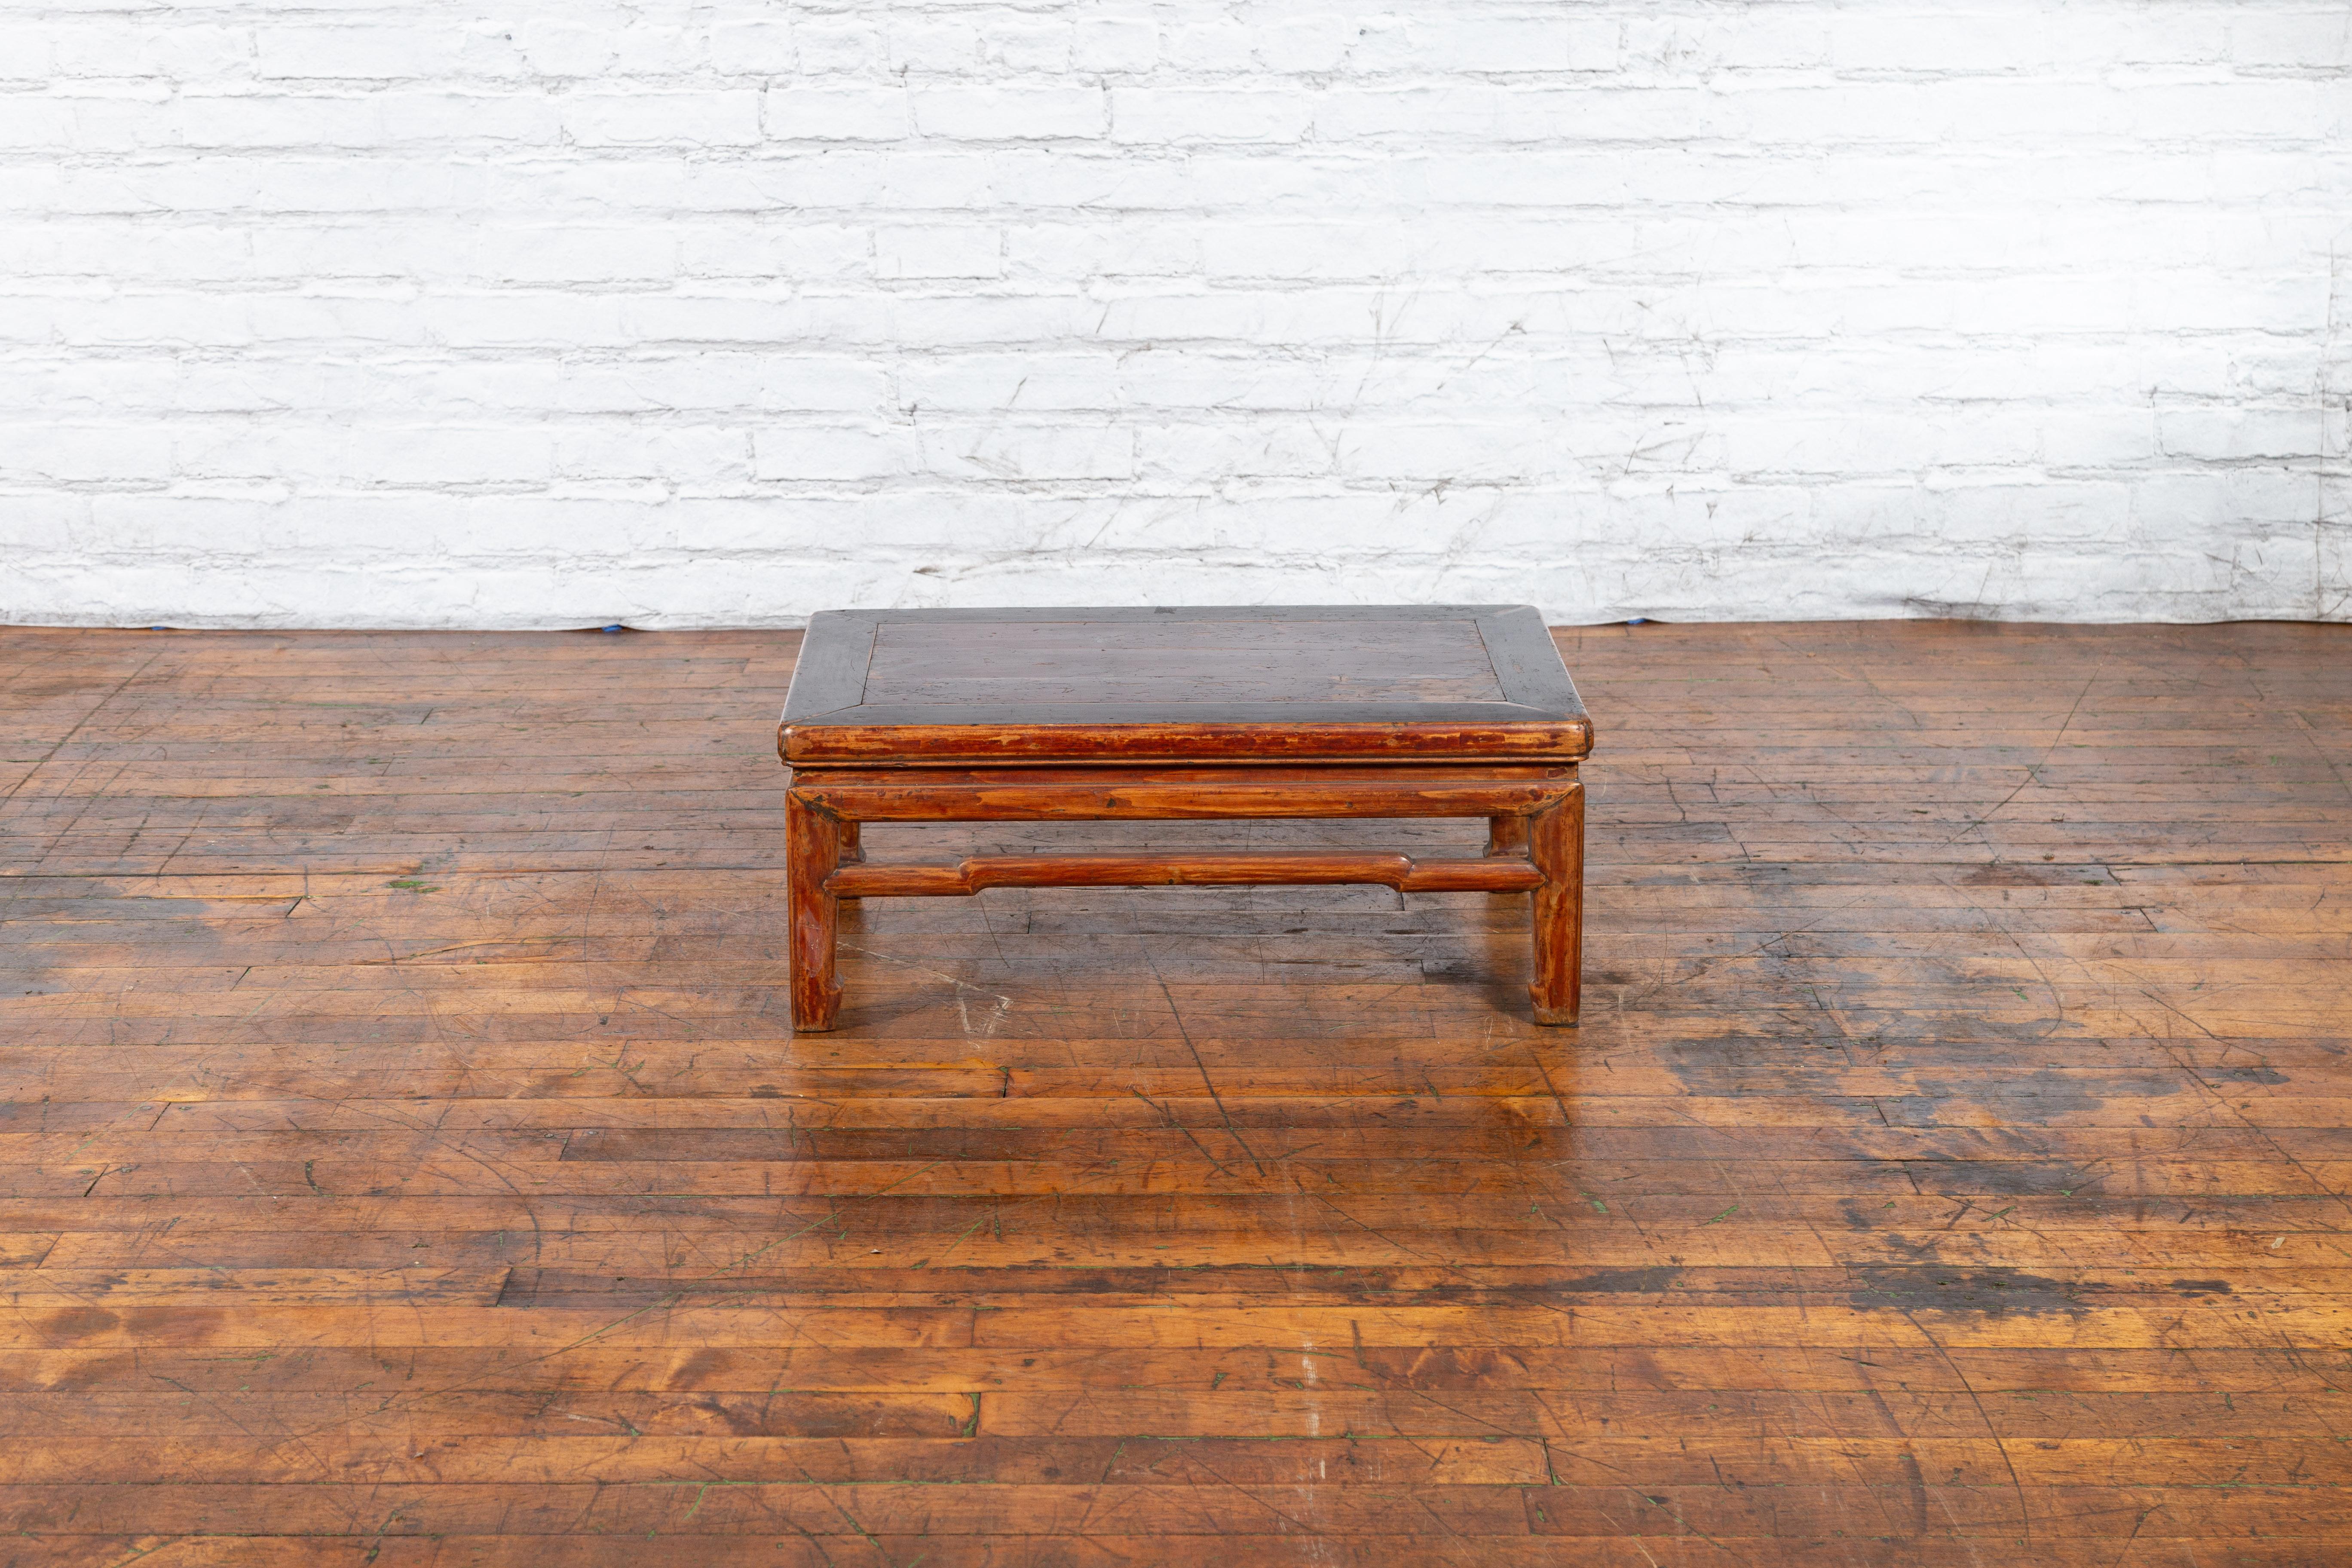 Qing Dynasty 19th Century Low Distressed Side Table with Humpback Stretchers In Good Condition For Sale In Yonkers, NY